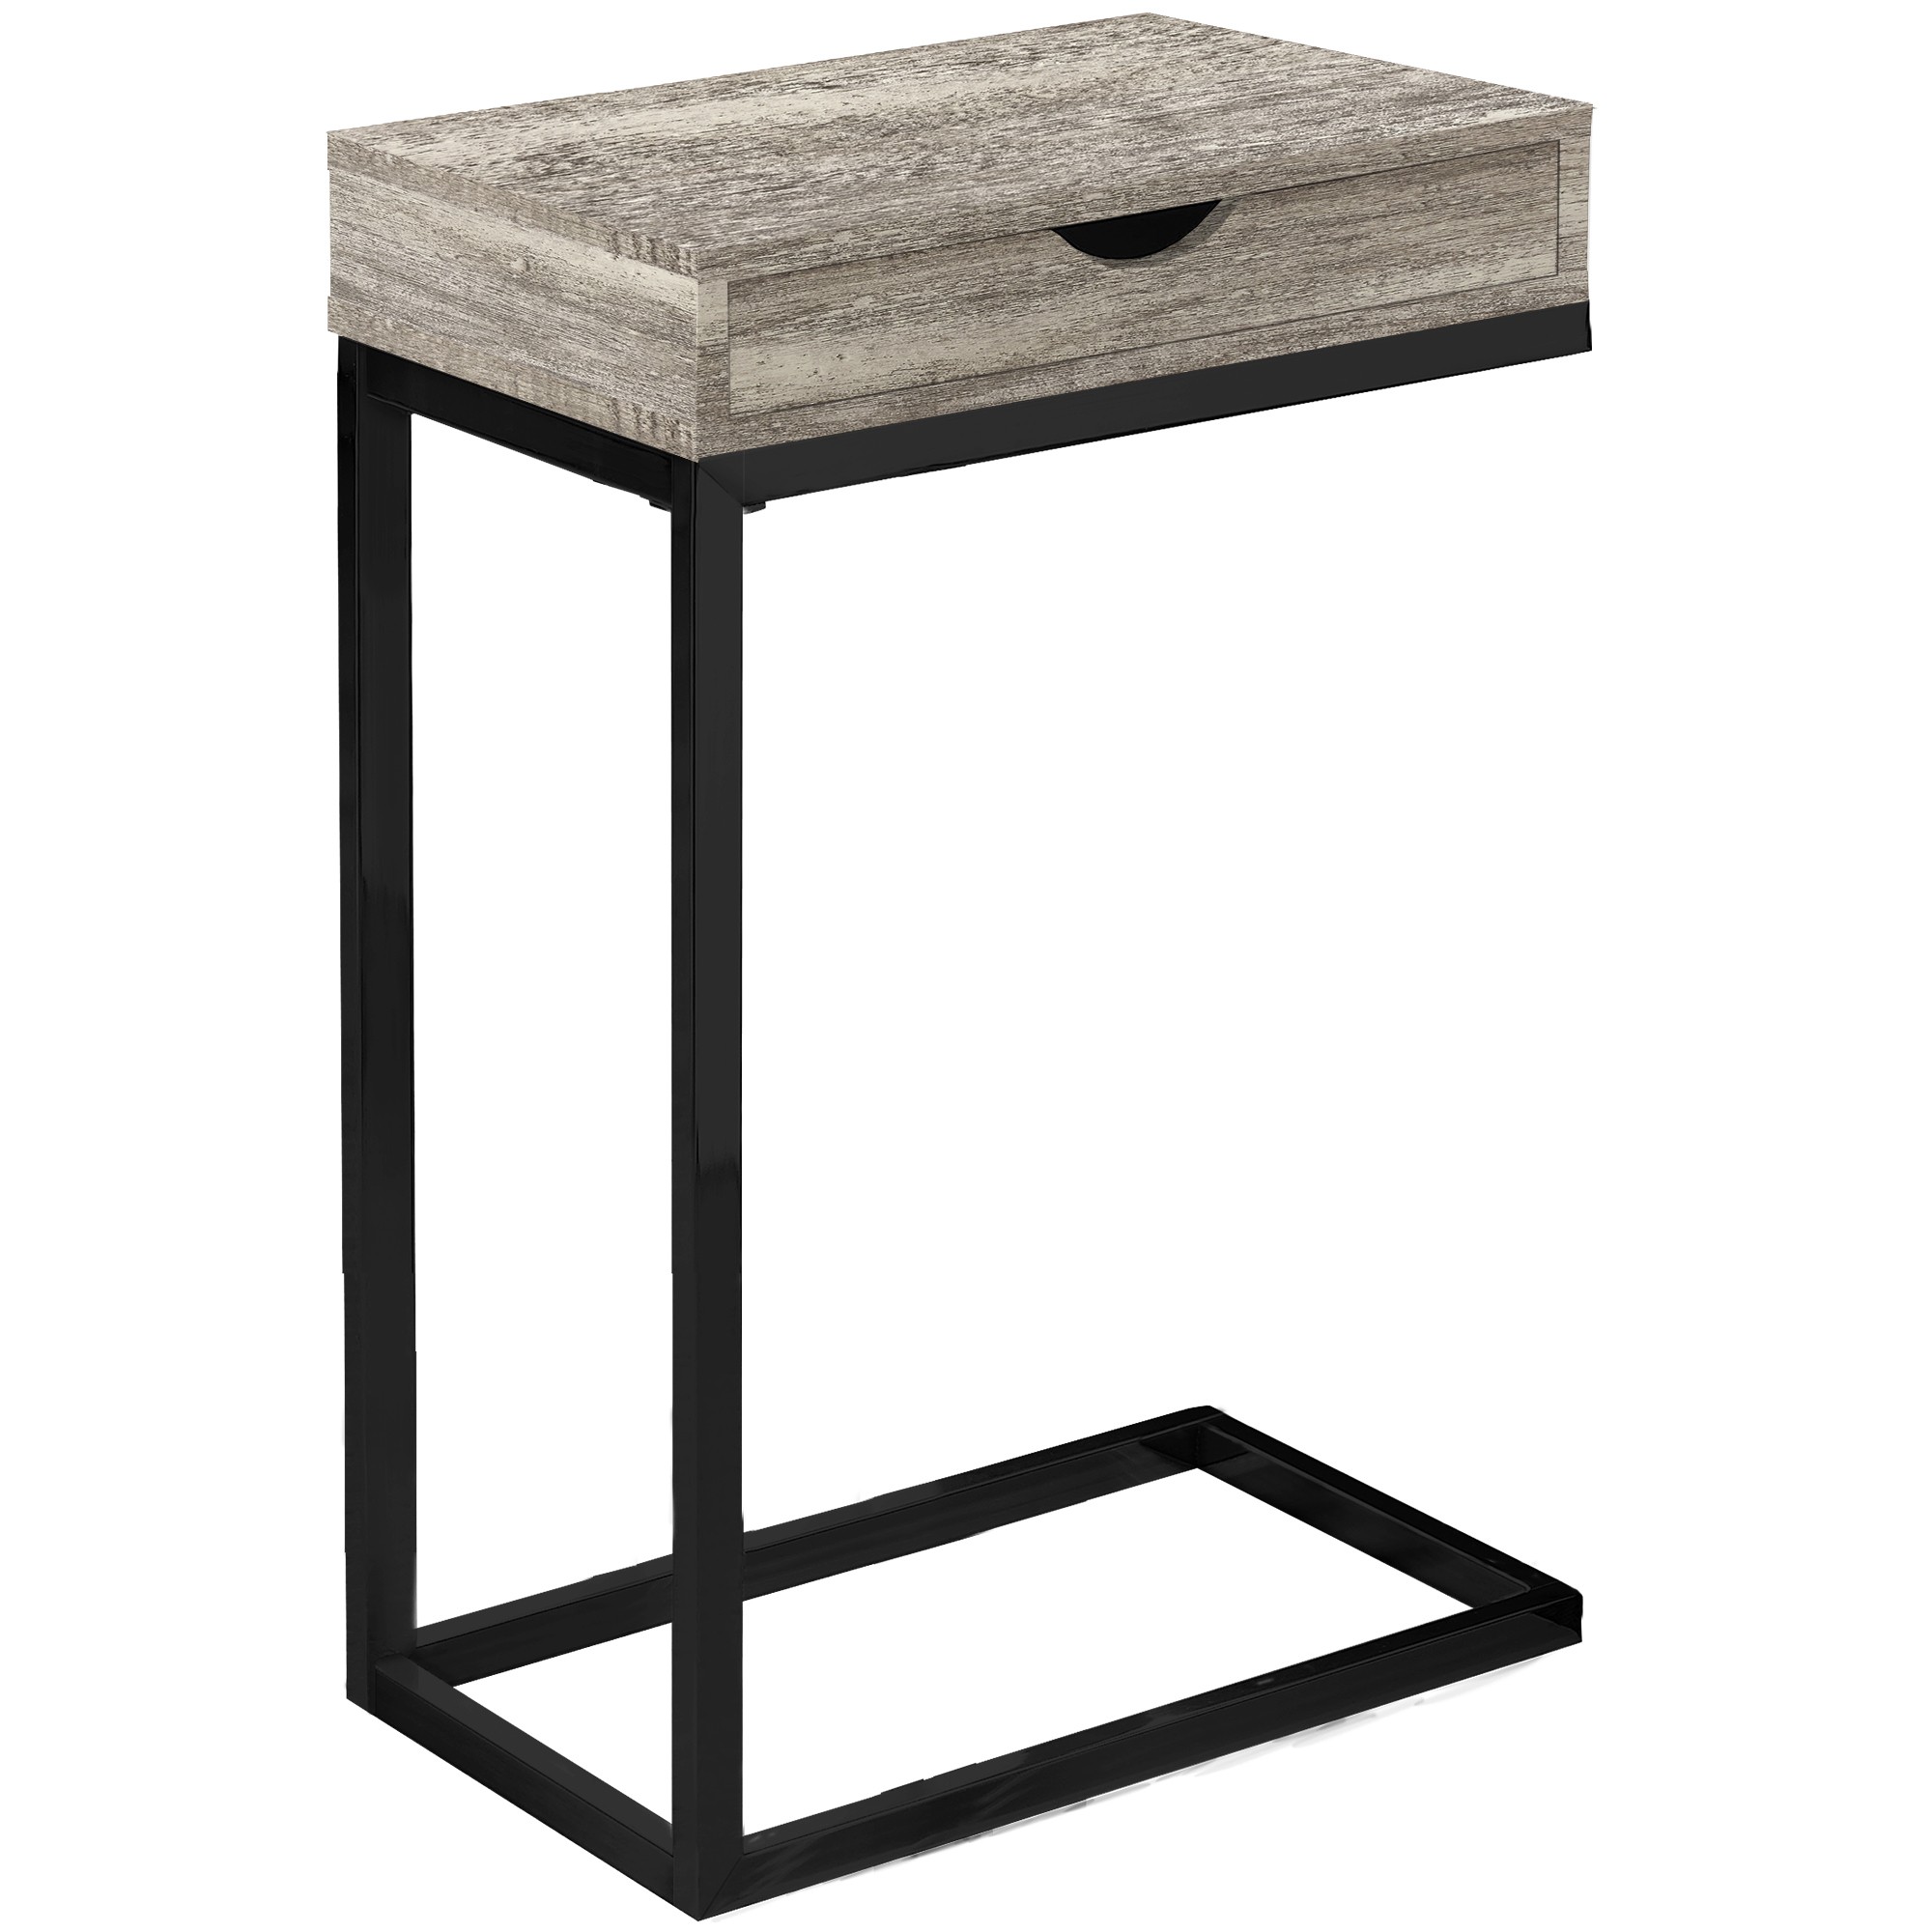 10.25" x 15.75" x 24.5" Taupe Finish Drawer and Black Metal Accent Table